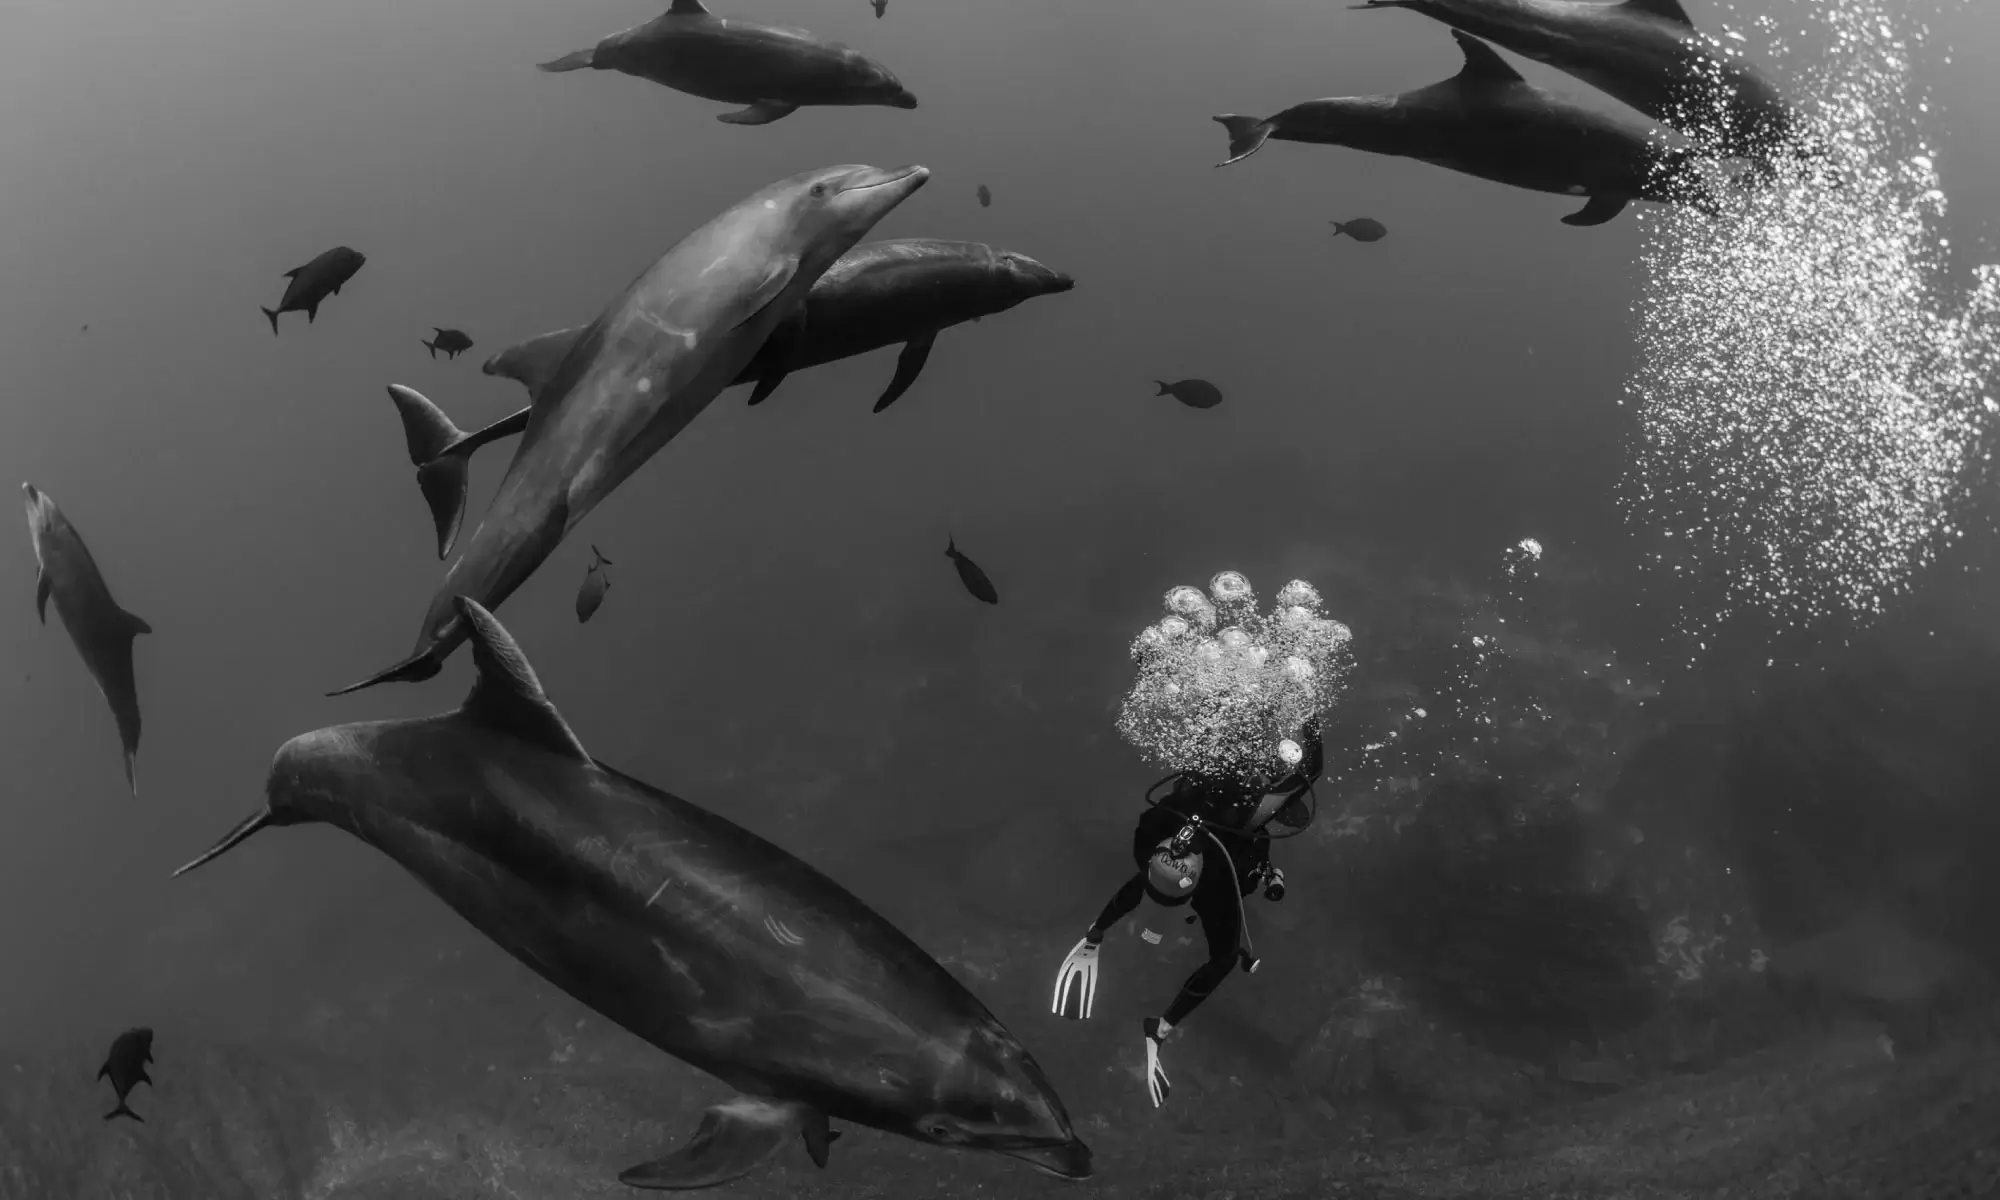 Playfull Dolphins with Diver - Revillagigedo Archipelago